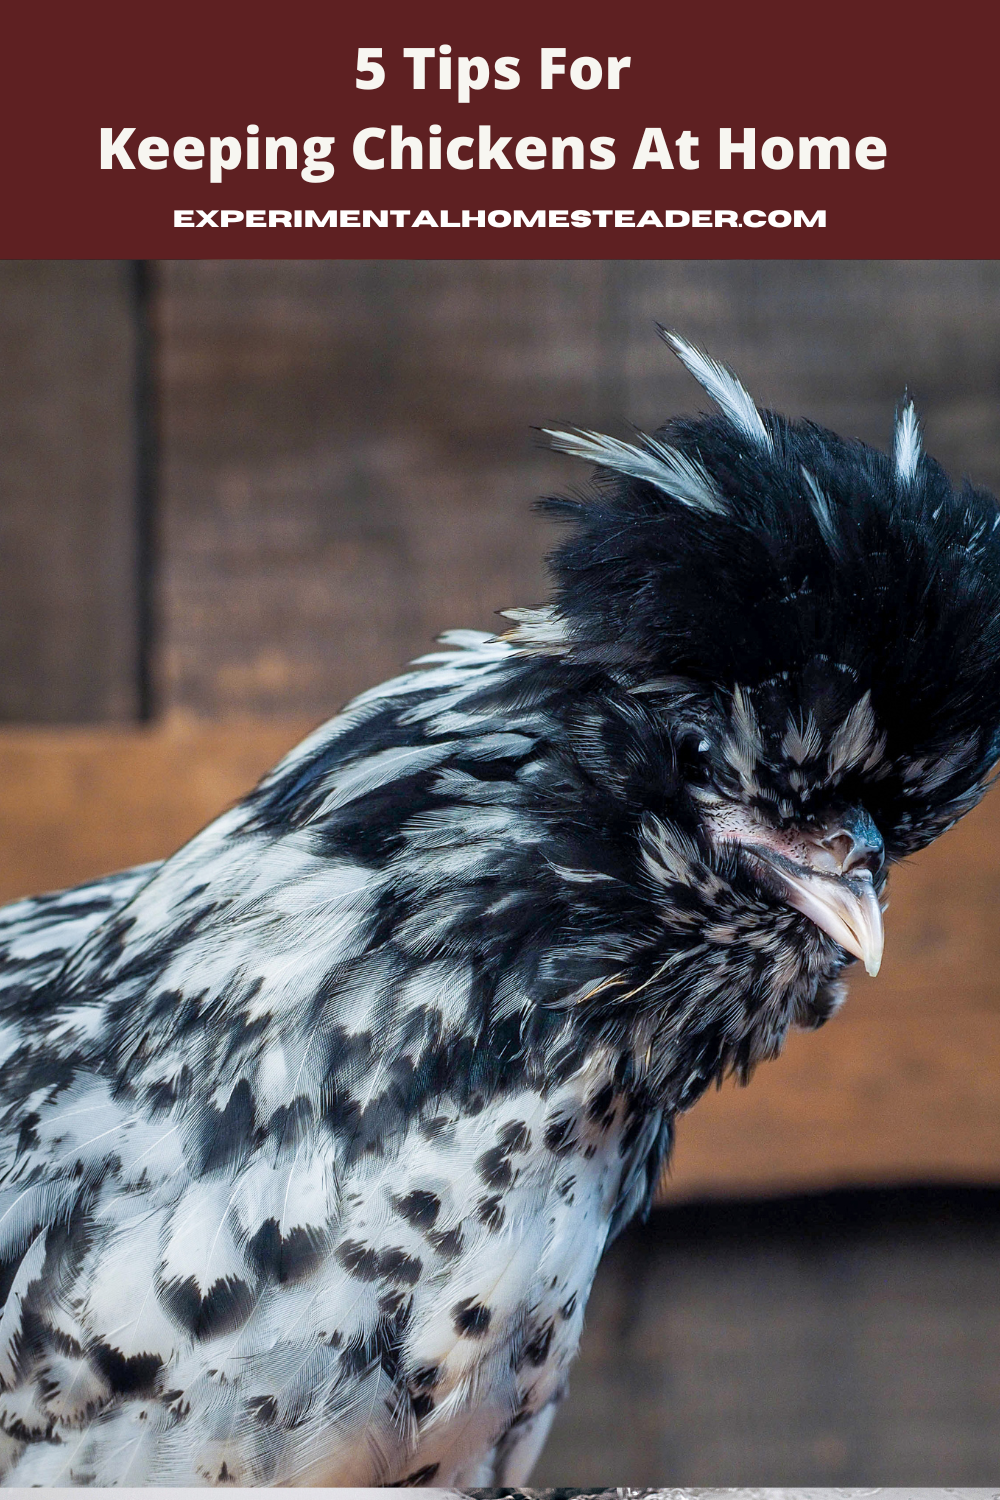 A Polish Crested black and white chicken.